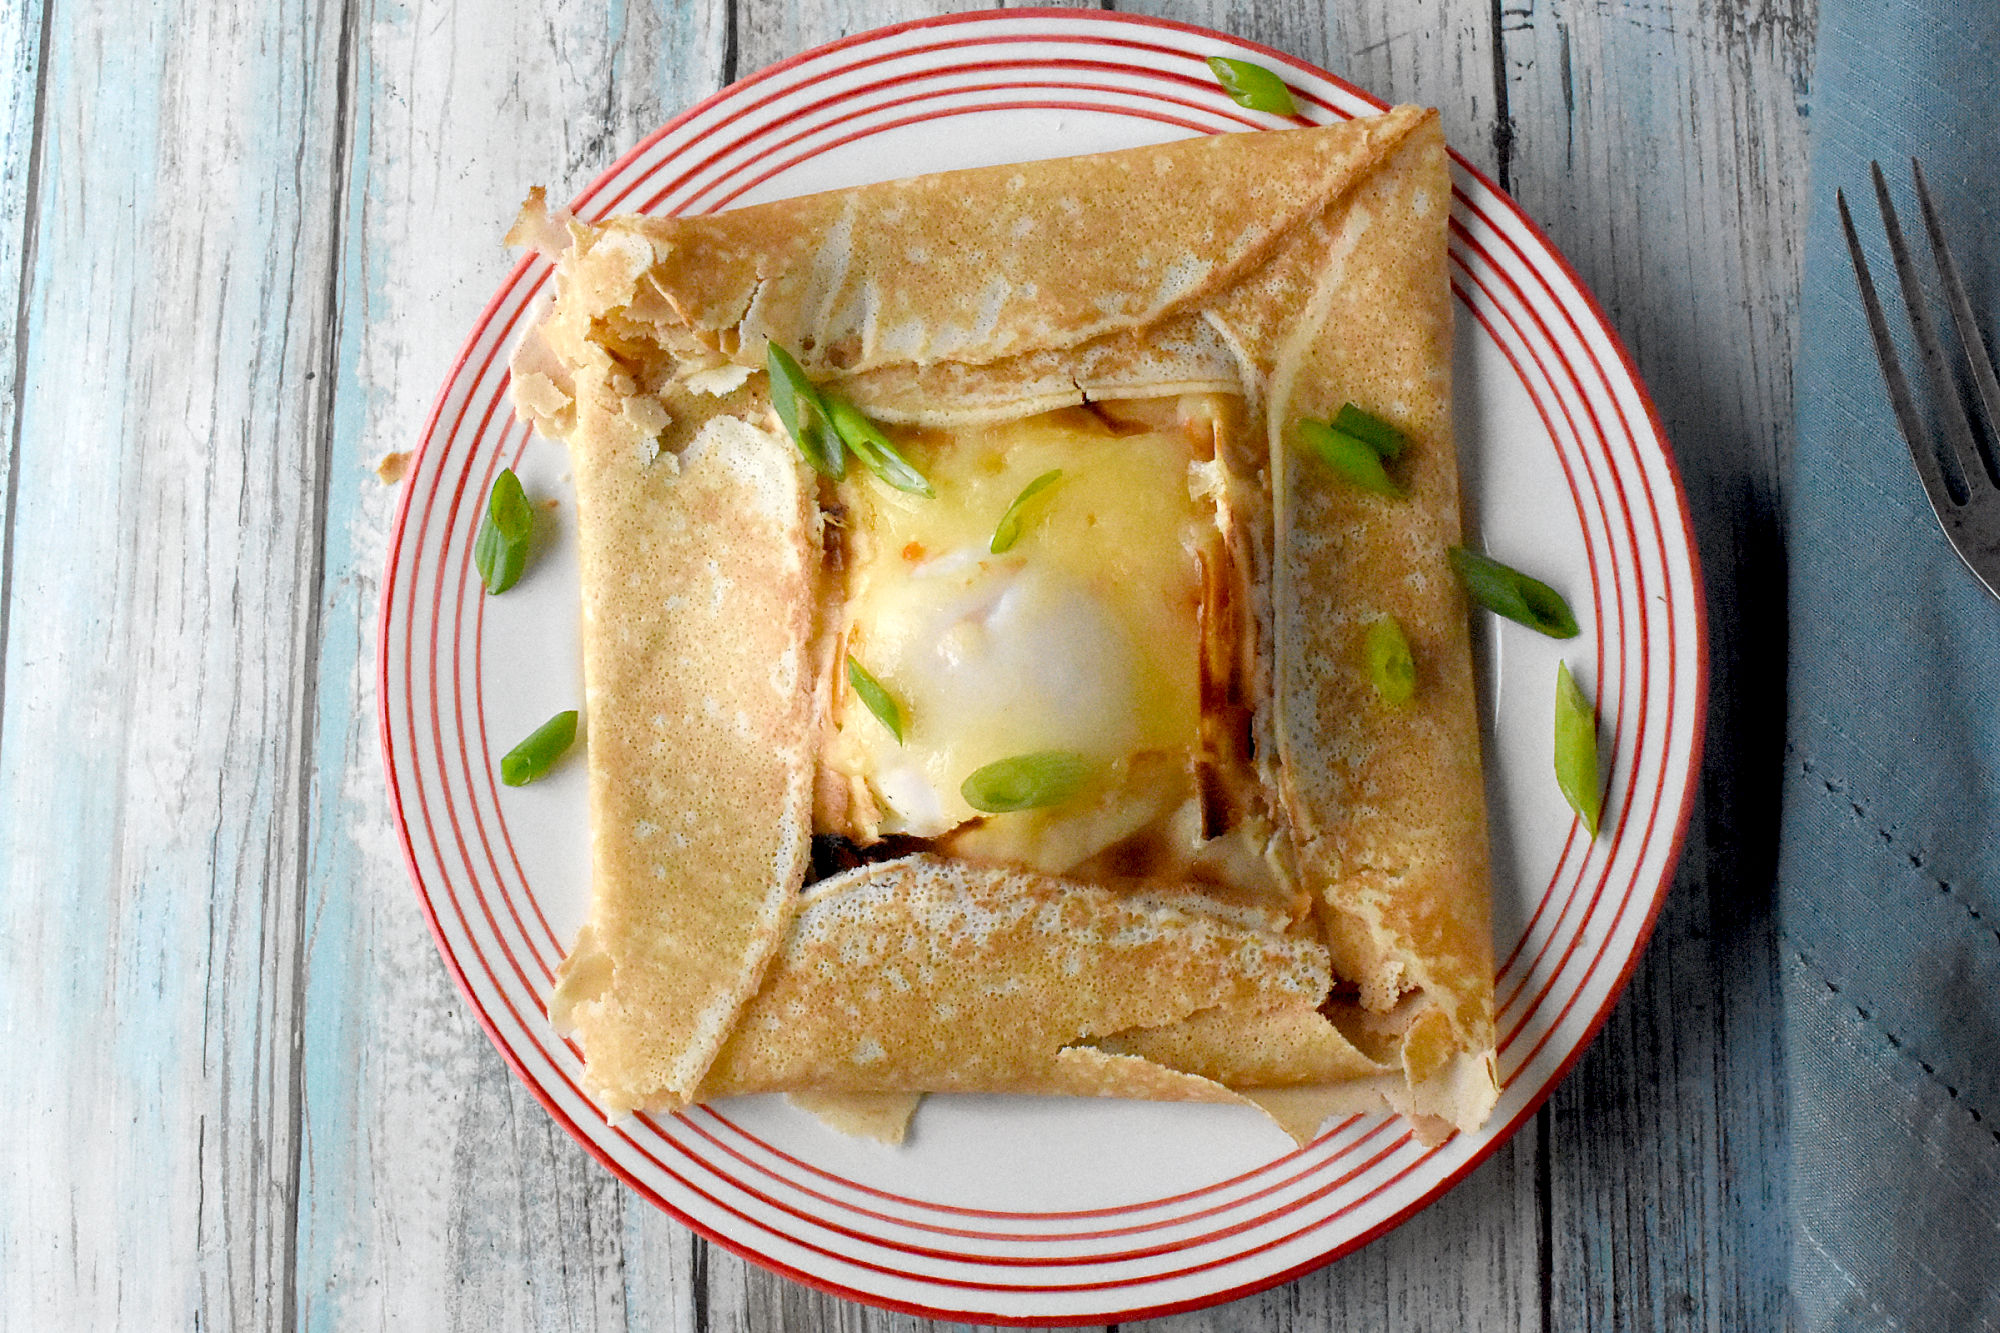 Tex-Mex Breakfast Crepes are the perfect combination of savory and spicy.  Get ready for a flavor fiesta! #TexMexCrepes #BreakfastCrepes #MexicanBreakfast #CrepesofInstagram #FoodieBreakfast
